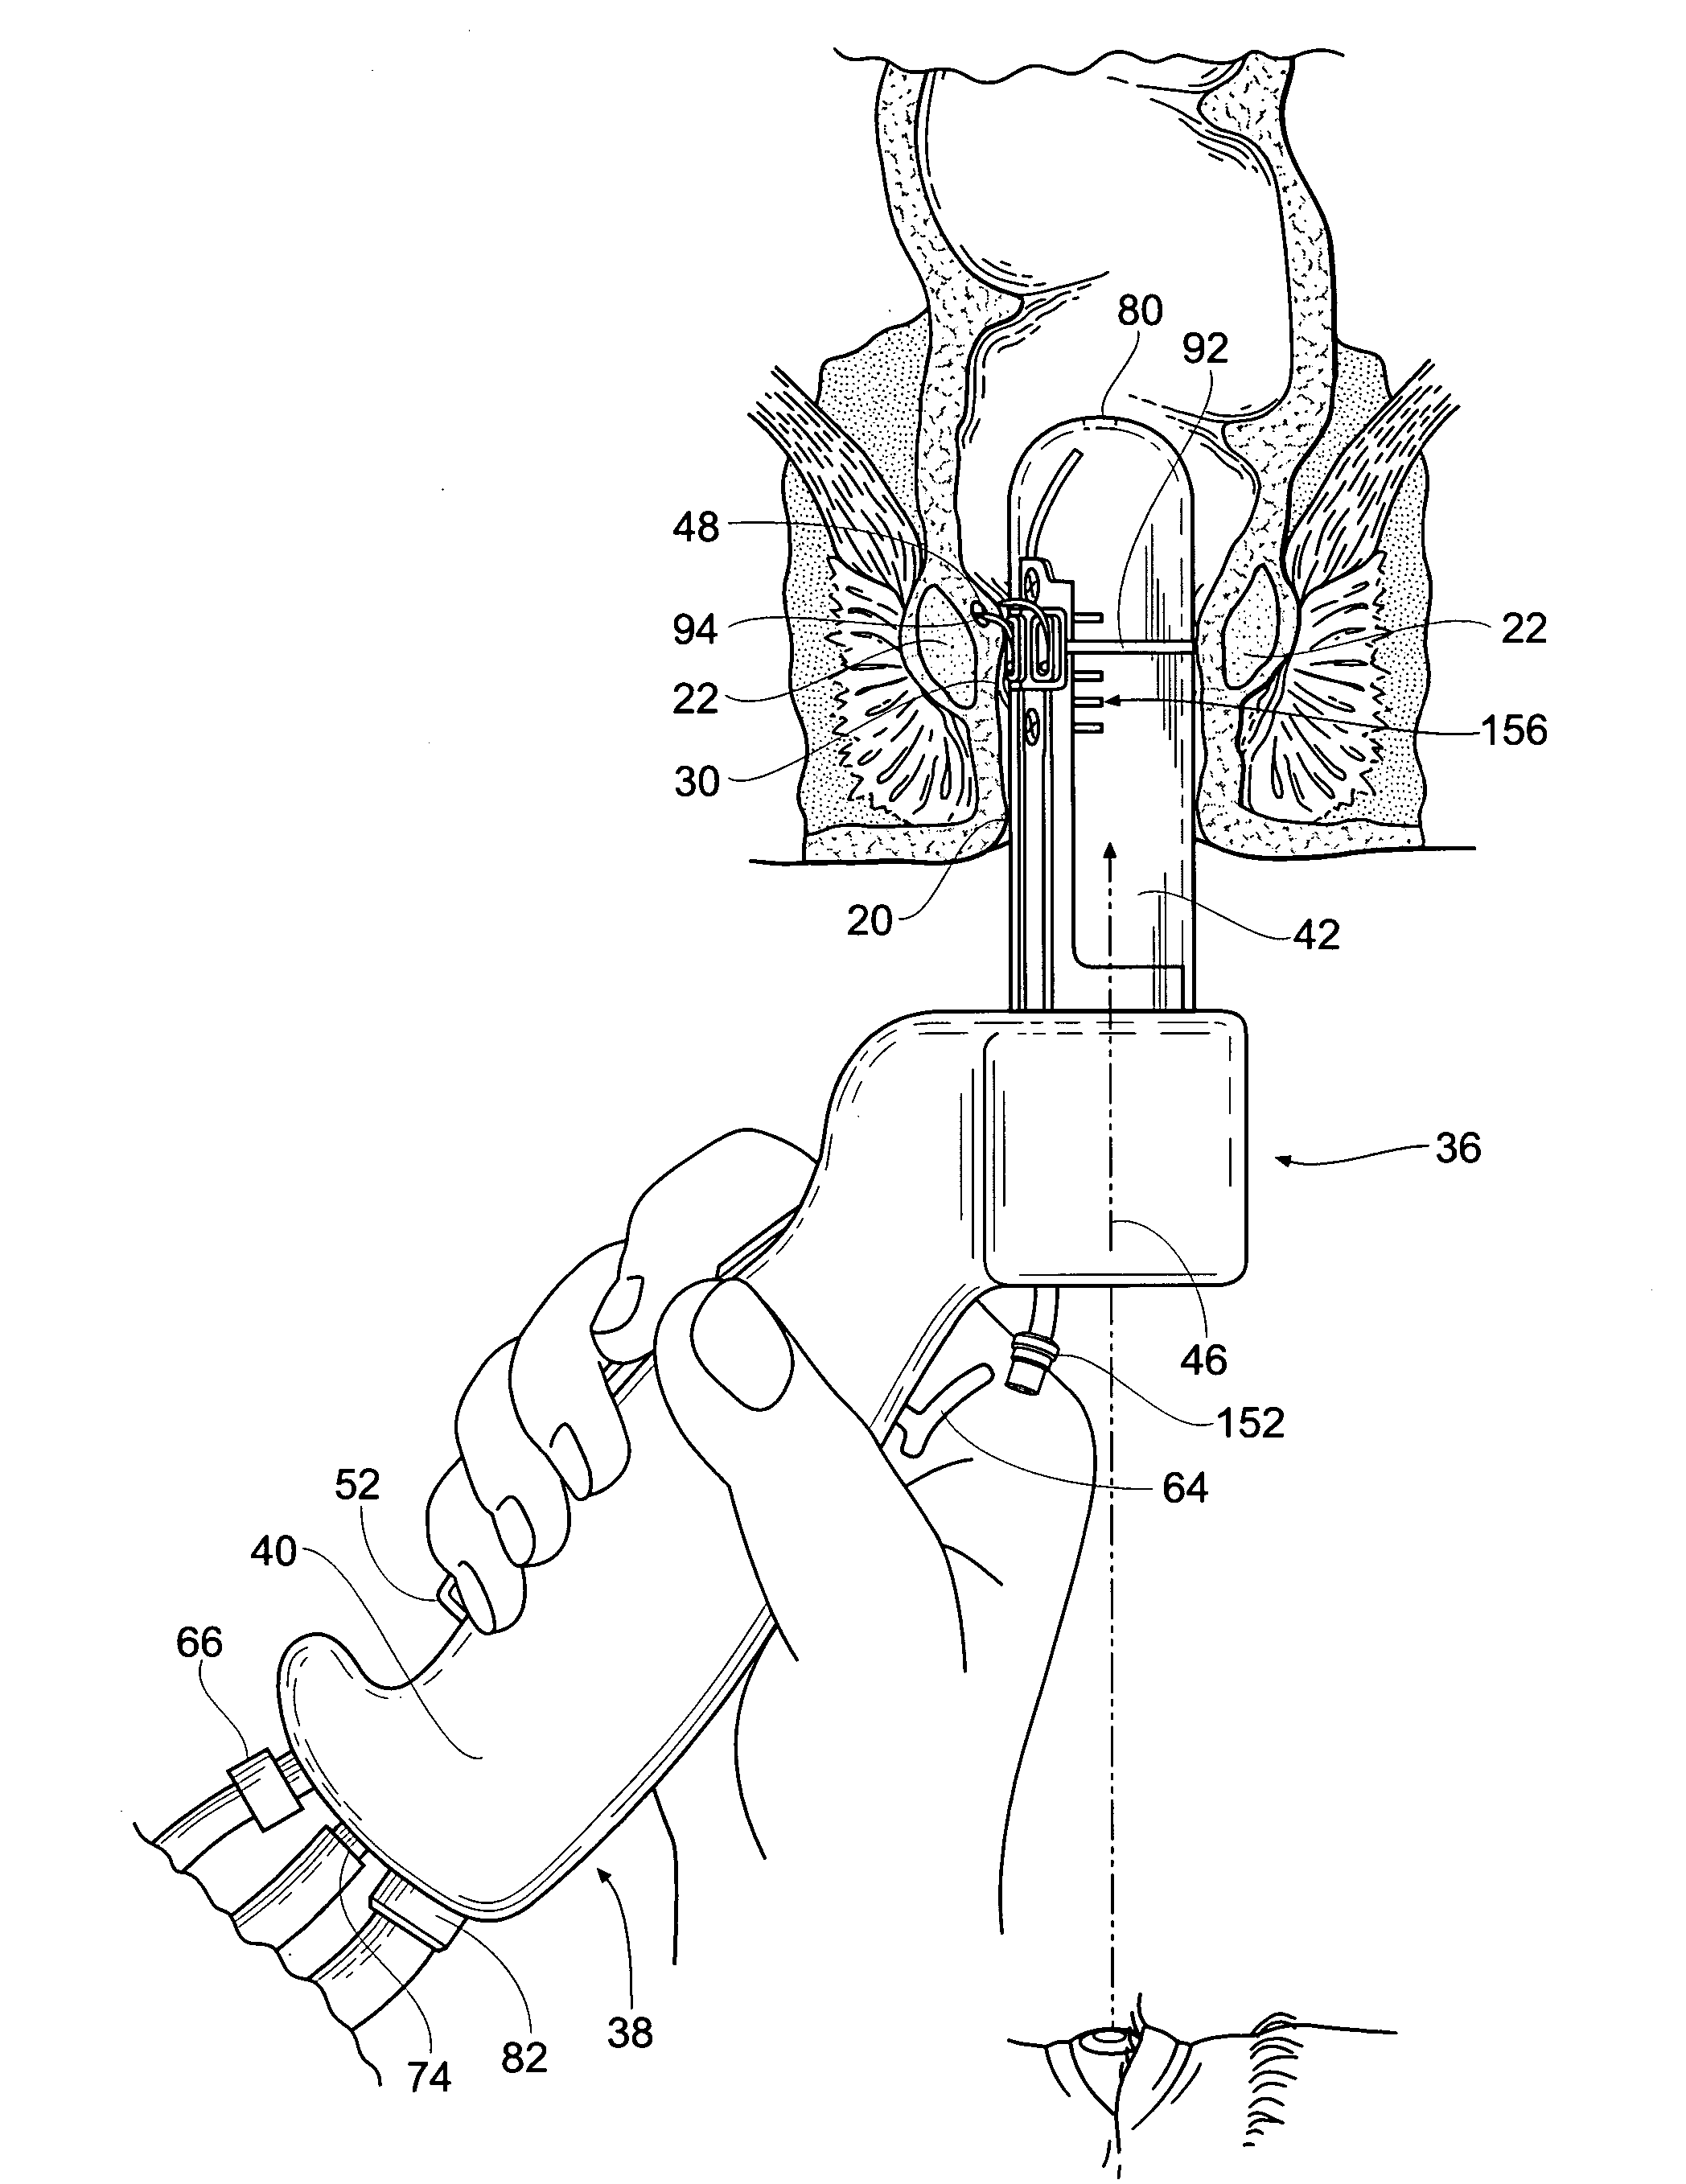 Systems and methods for treating dysfunctions in the intestines and rectum that adapt to the anatomic form and structure of different individuals